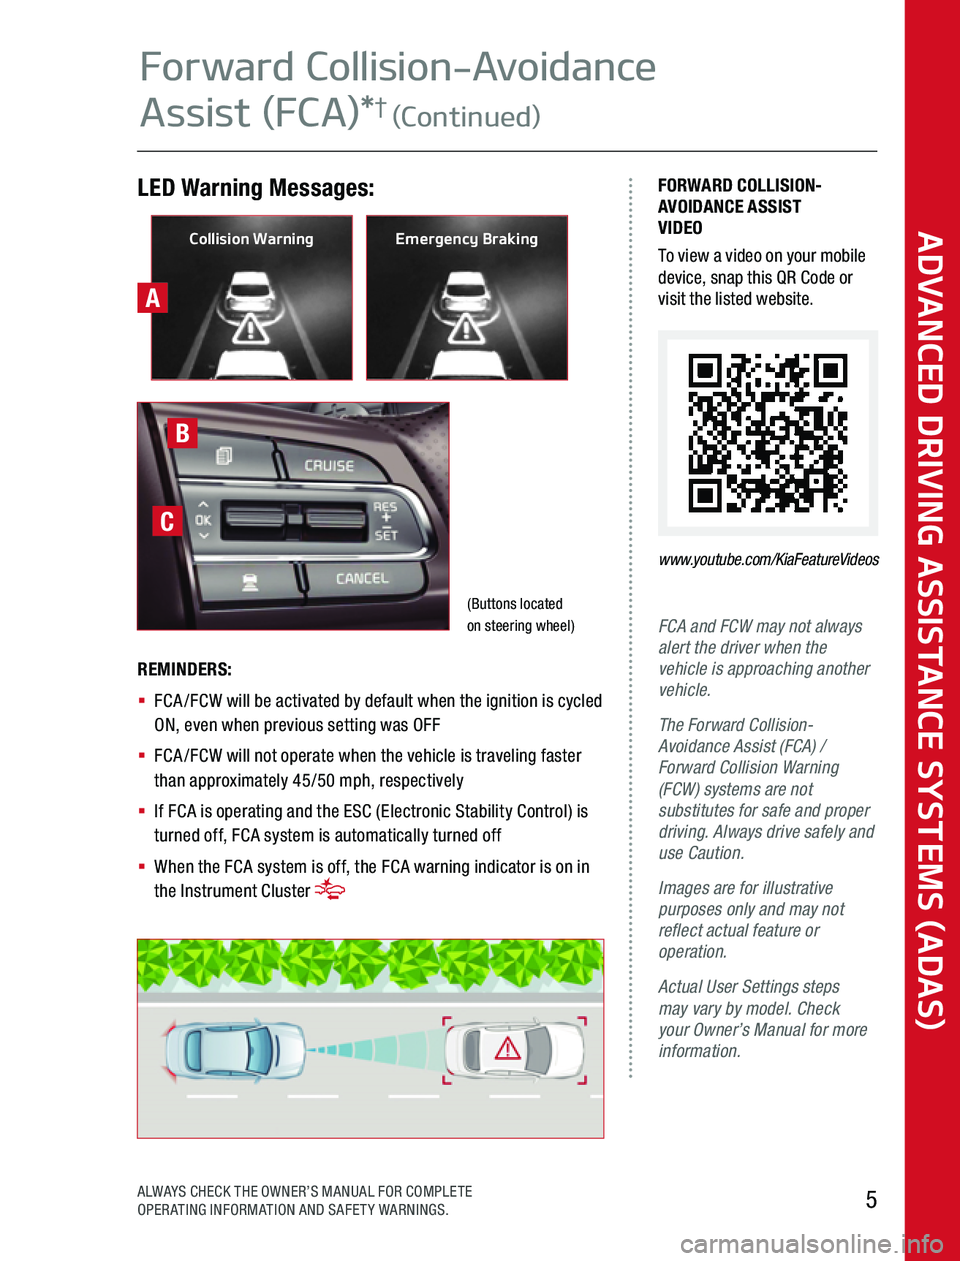 KIA OPTIMA PHEV 2020  Advanced Driving Assistance System A
LED Warning Messages:FORWARD COLLISION-AVOIDANCE ASSIST VIDEOTo view a video on your mobile device, snap this QR Code or visit the listed website 
www.youtube.com/KiaFeatureVideos
FCA and FCW may no